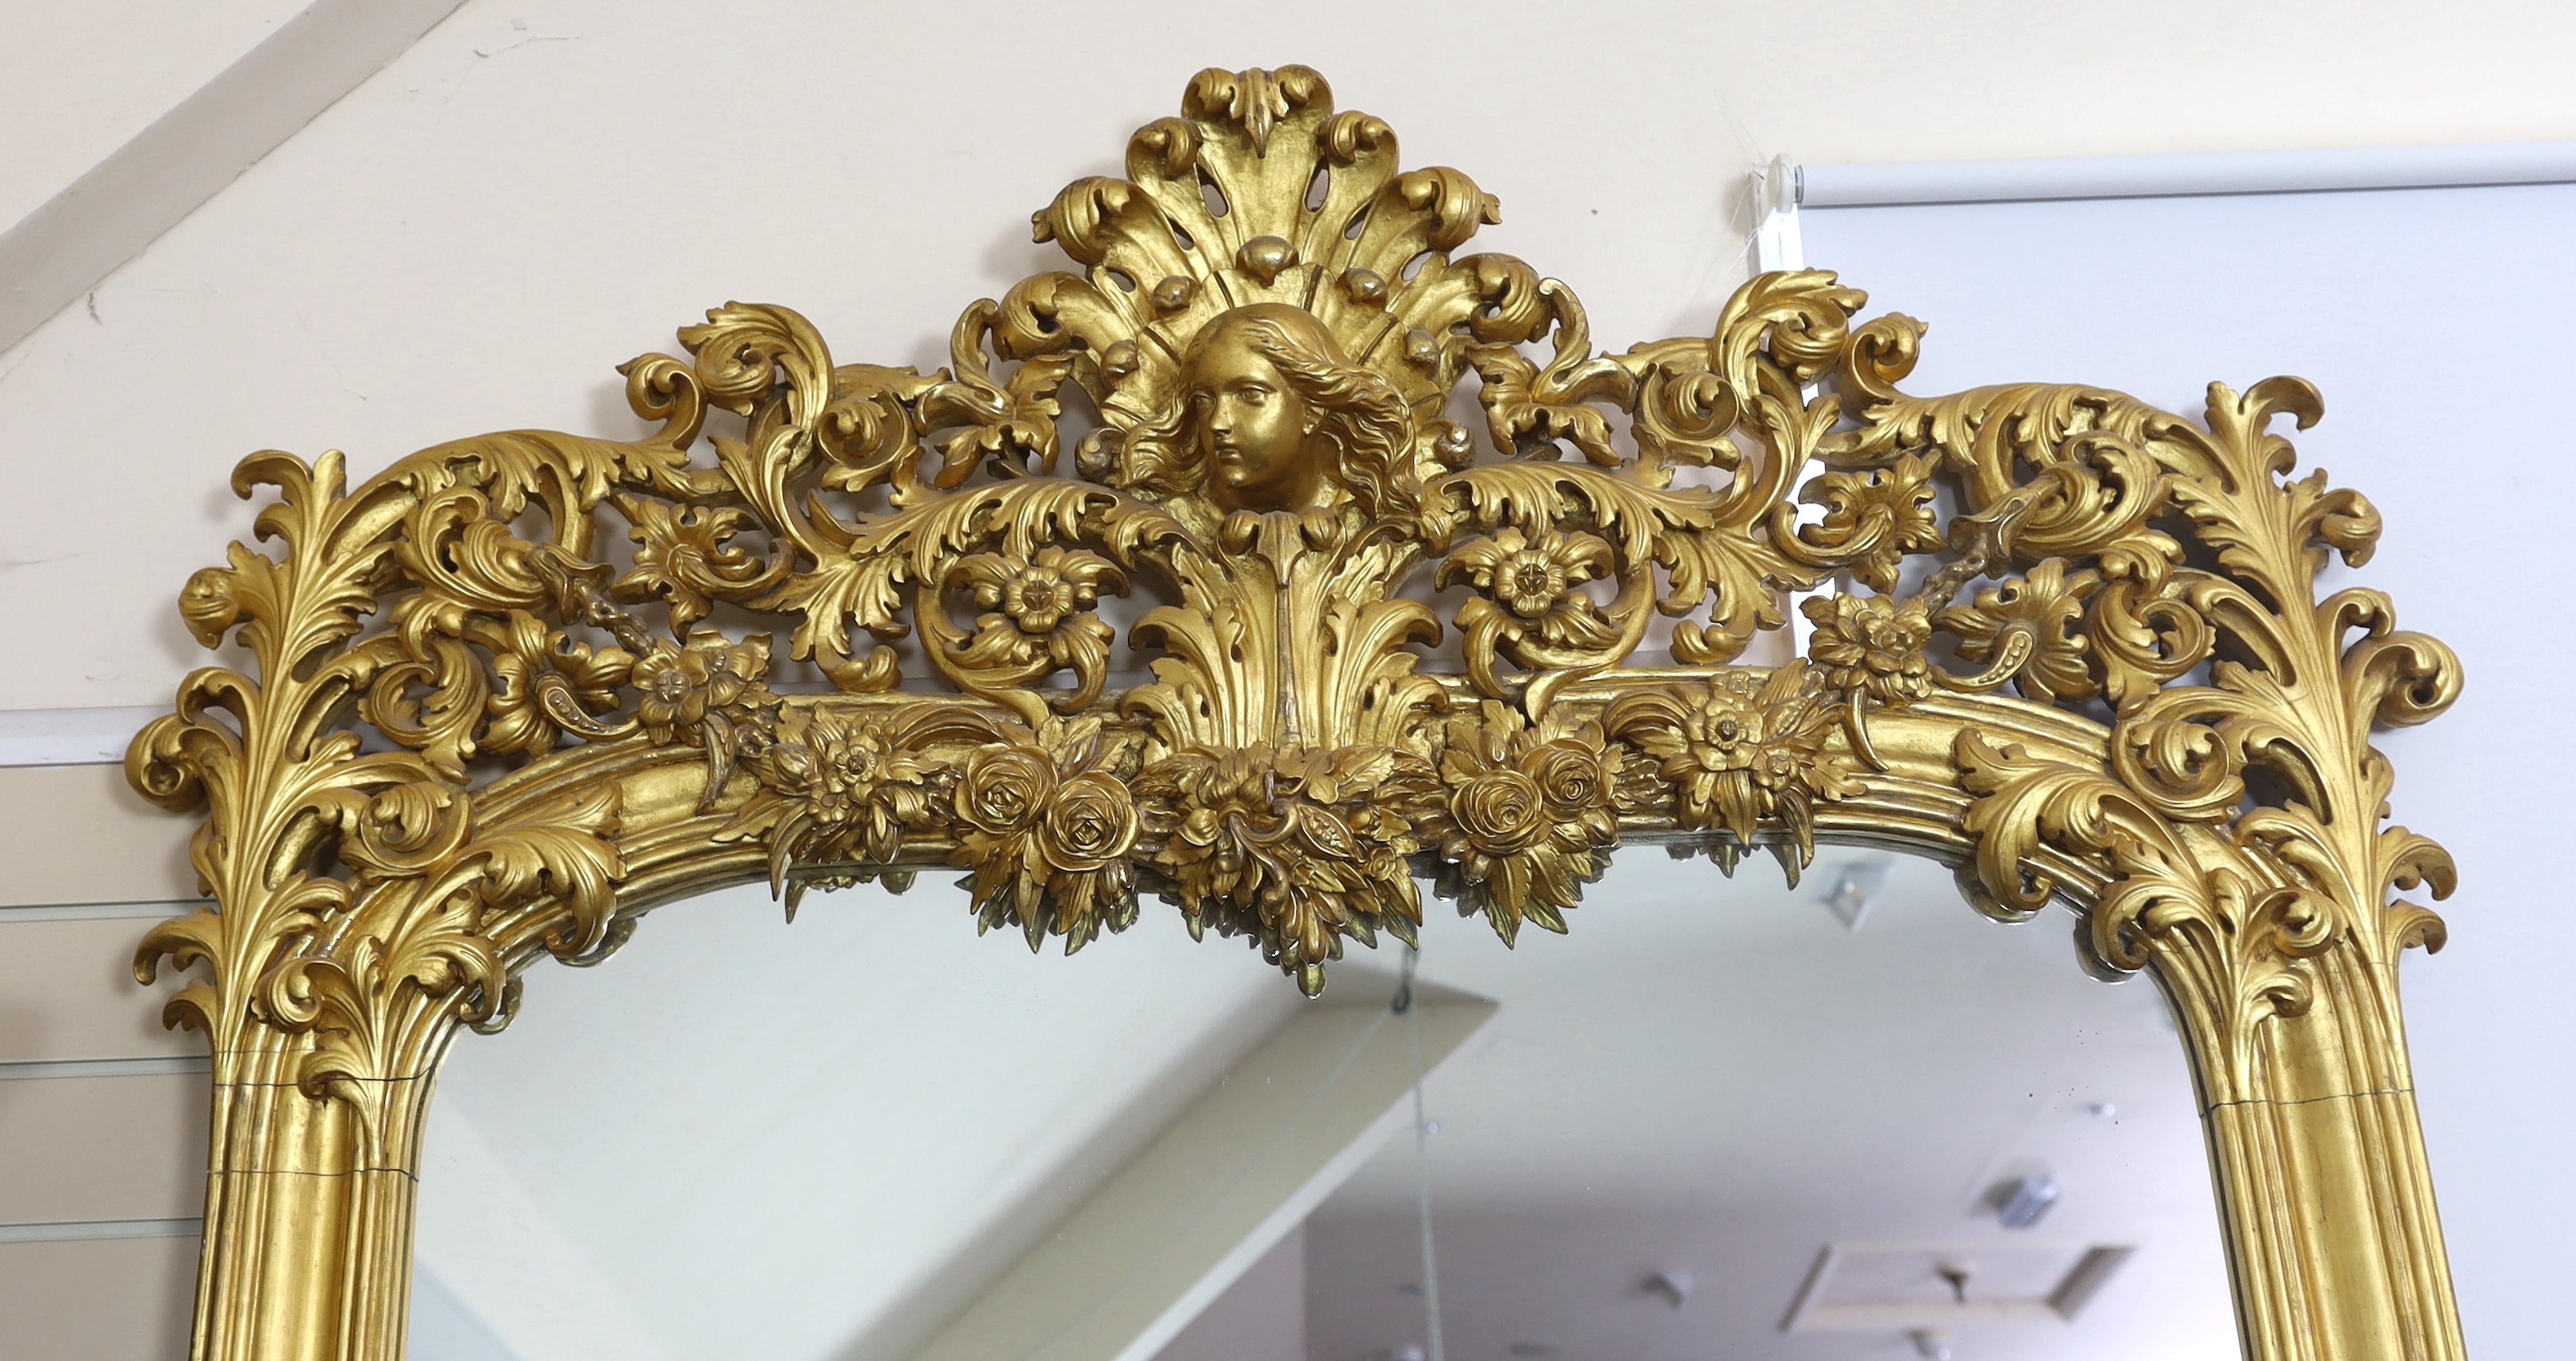 An ornate early 20th century carved giltwood wall mirror, width 146cm, height 250cm